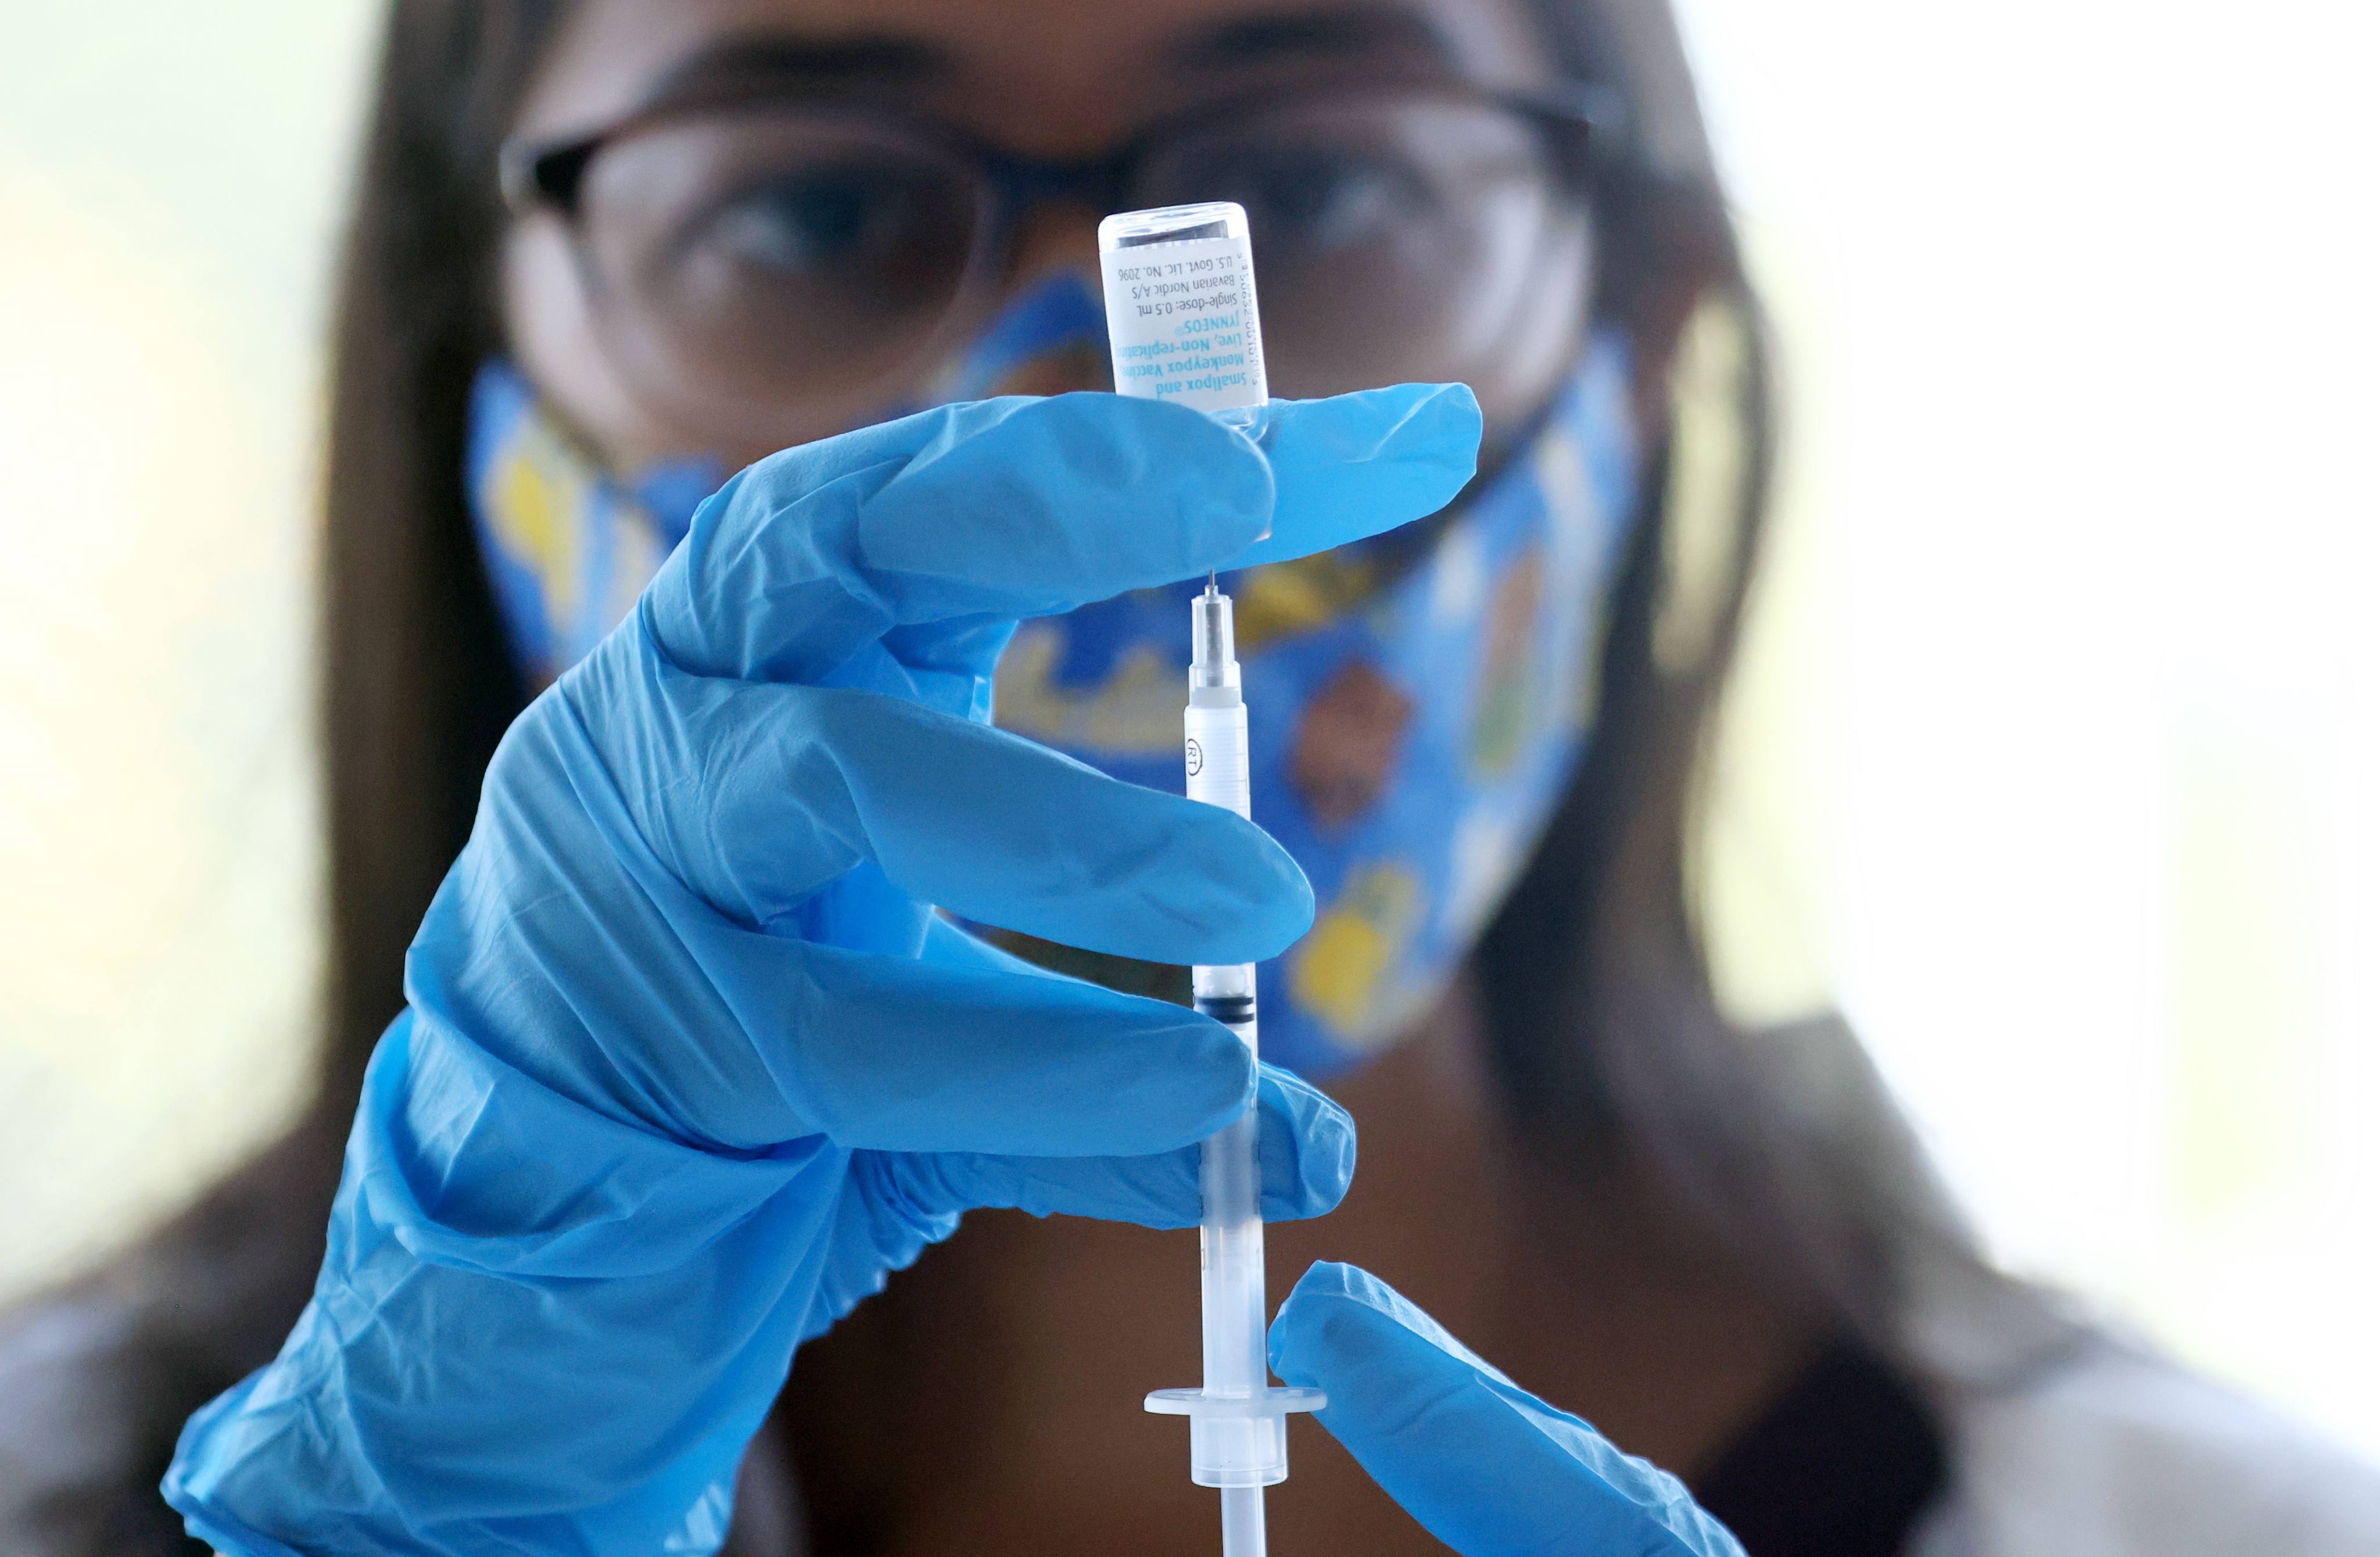 A pharmacist prepares a dose of mpox vaccine at a pop-up clinic in West Hollywood, California, in August 2022. Photo: AFP